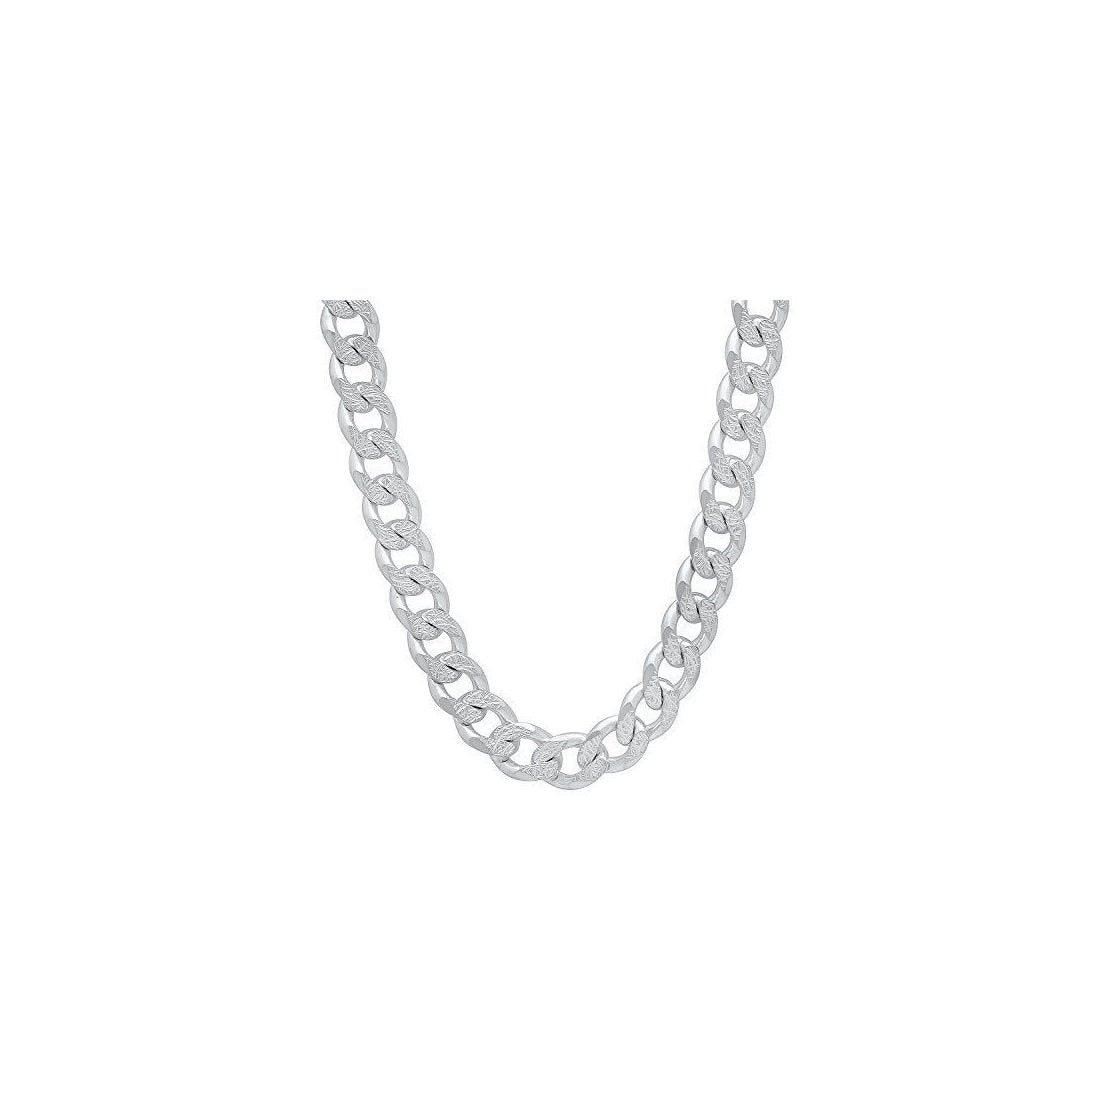 11.8MM 300 Curb Flat Link Chain .925 Solid Sterling Silver Sizes "8-32"